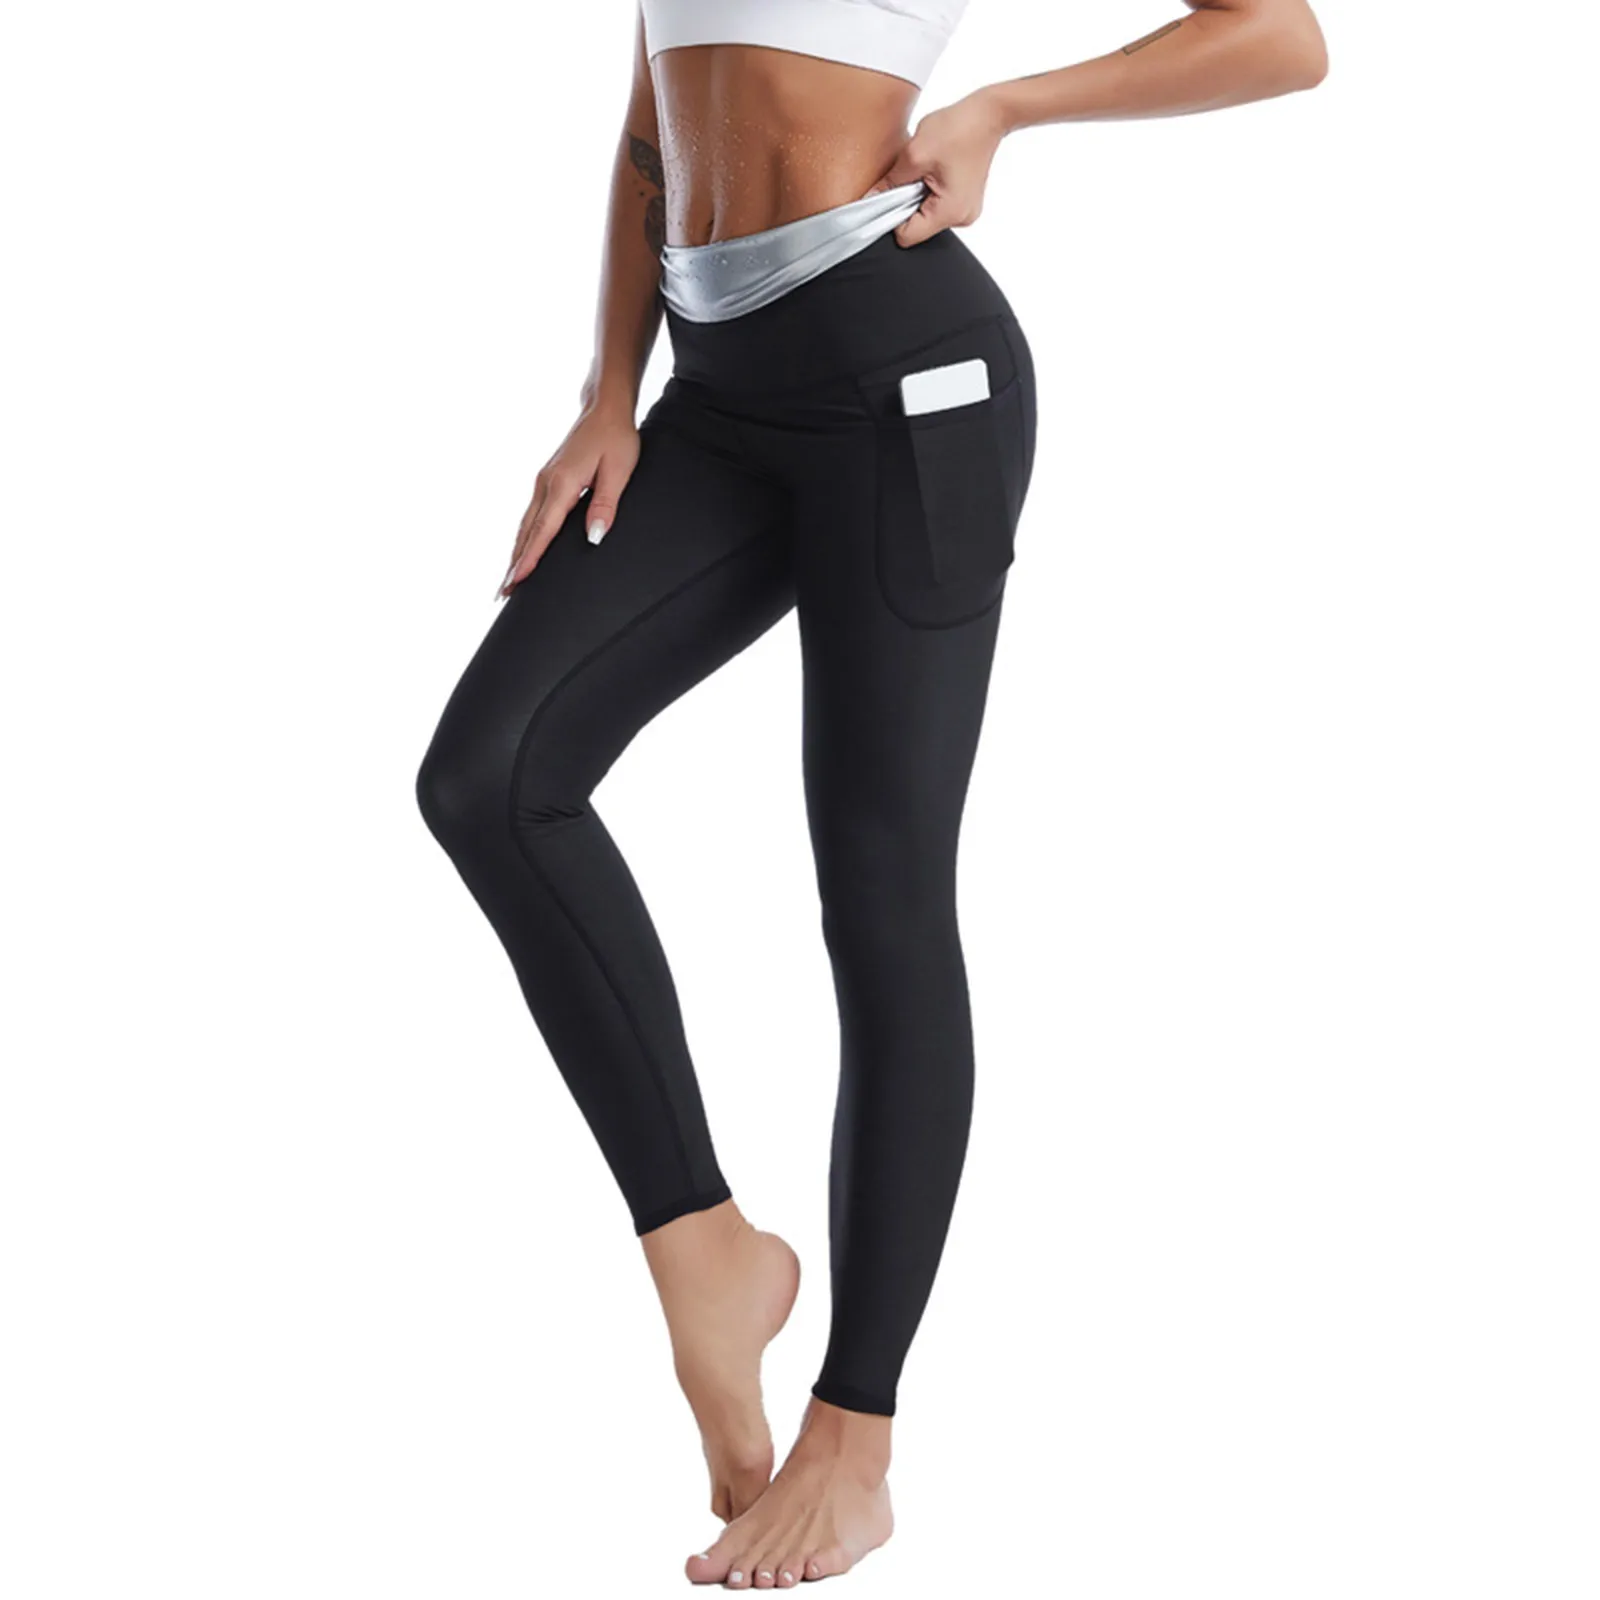 

Women Slimming Pants Silver Thermo Body Shaper coating Weight Loss Waist Trainer Fat Burning Sweat Sauna Capris Leggings Shapers